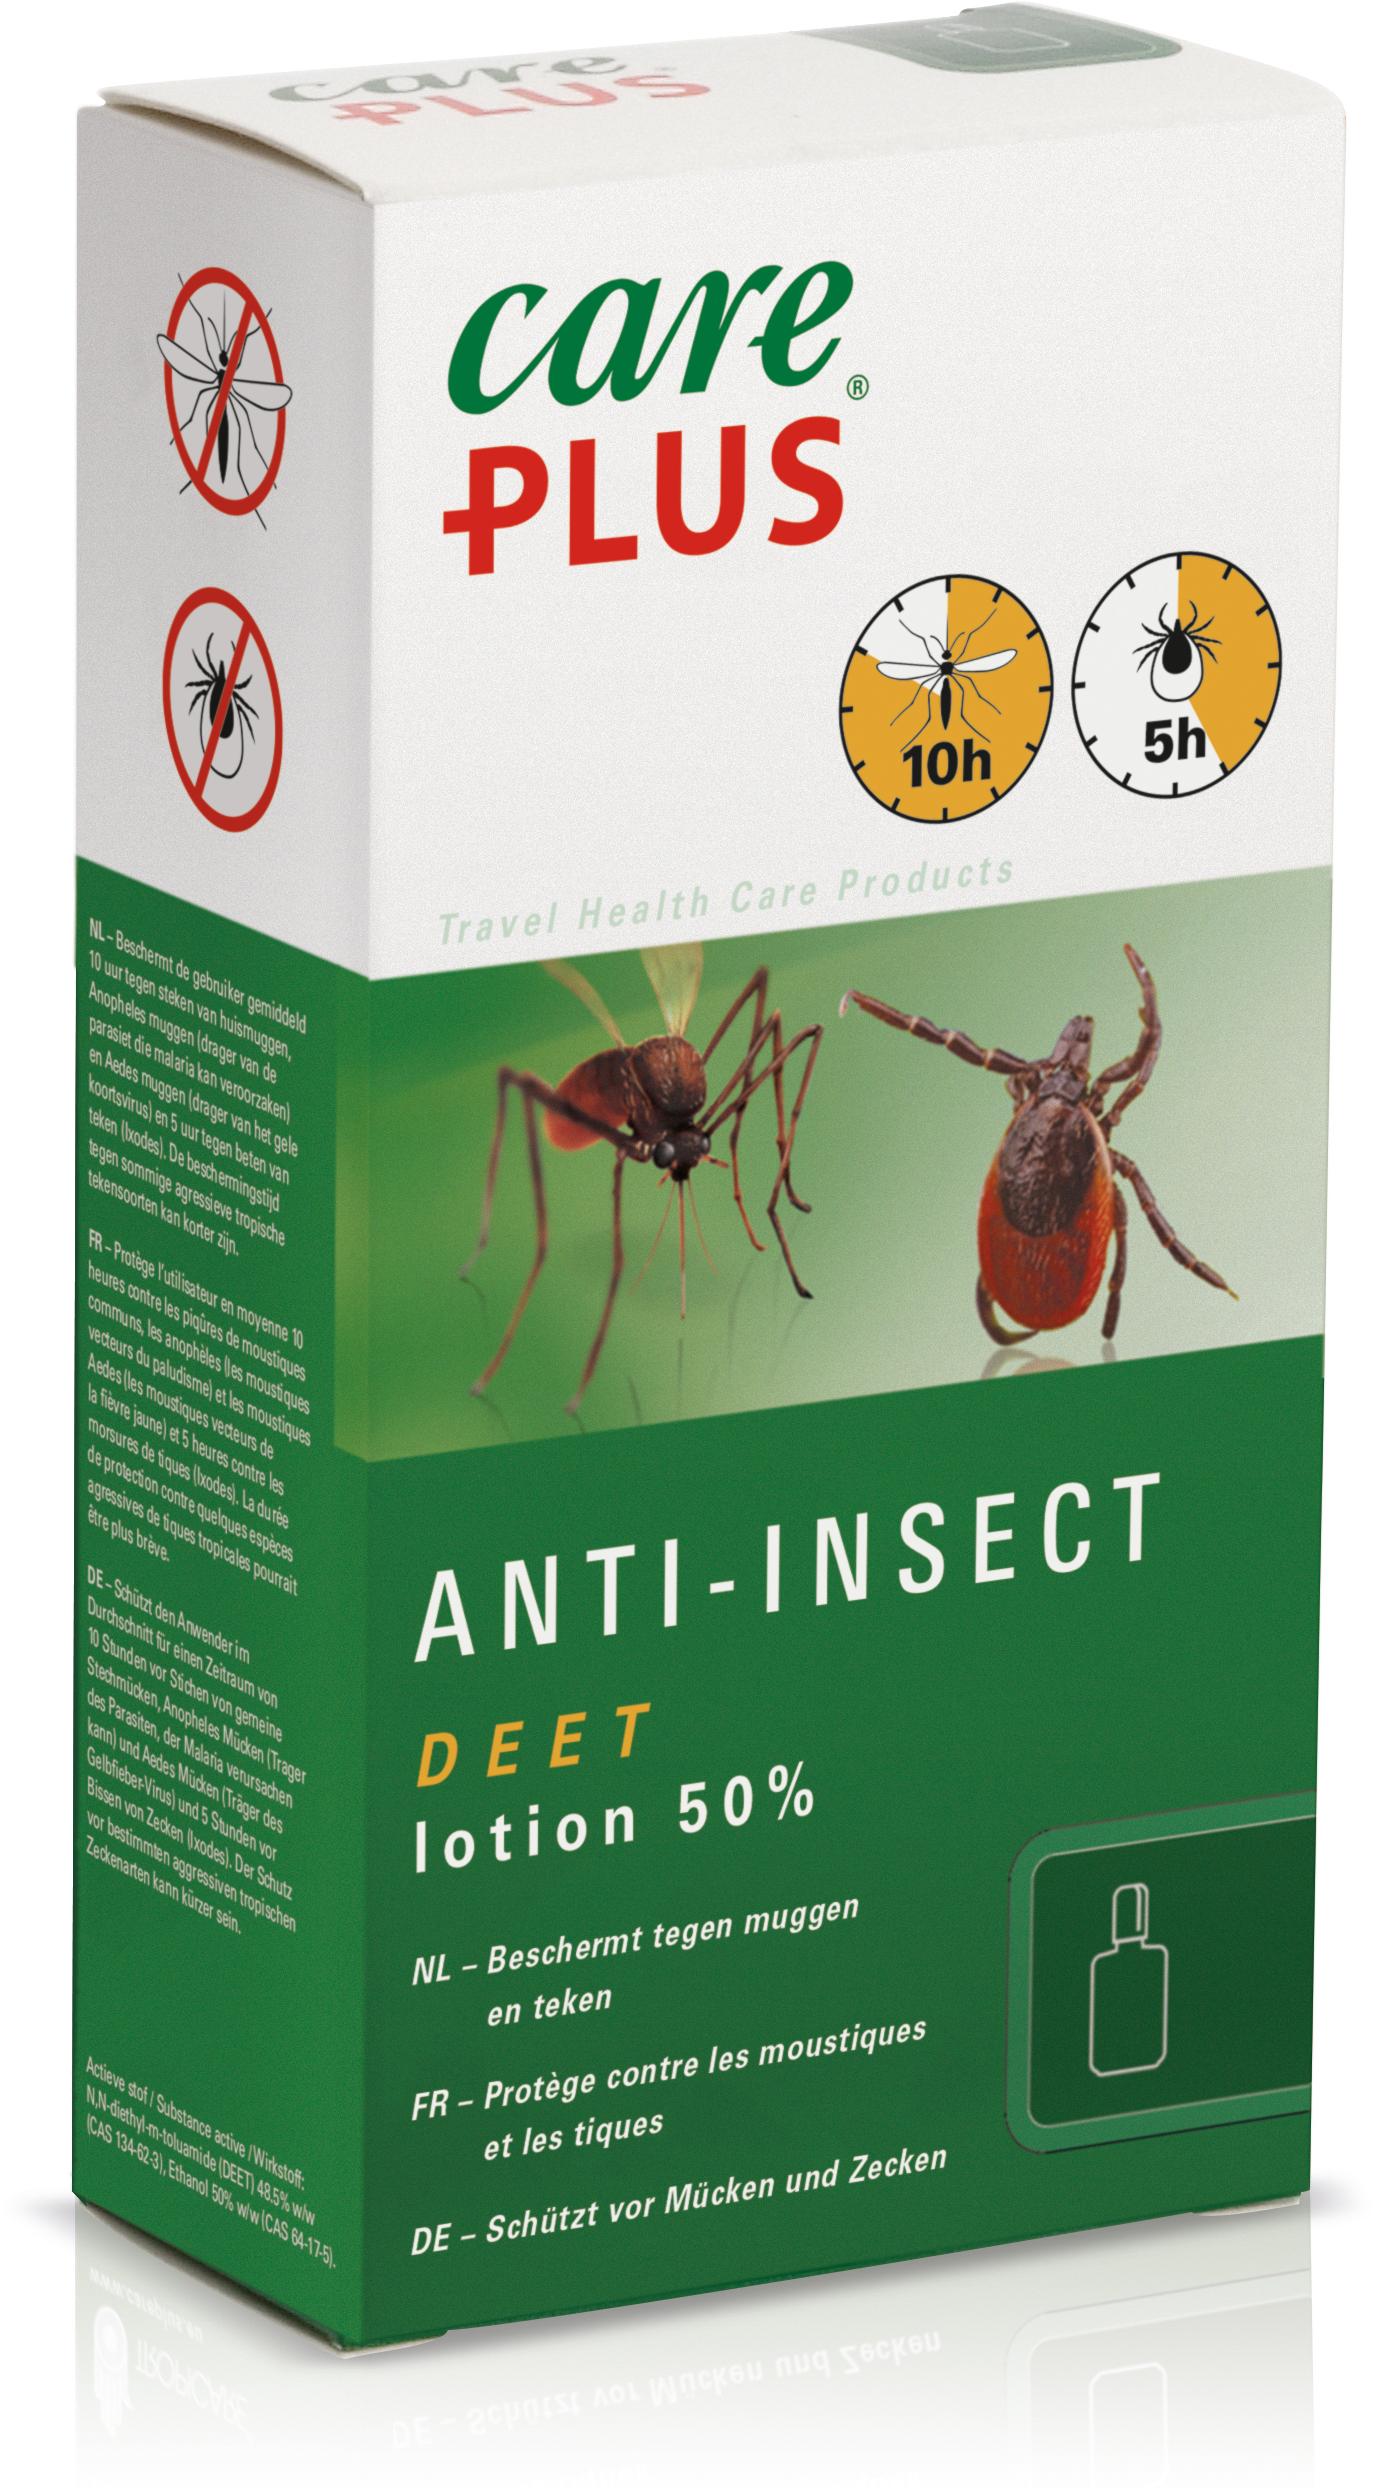 Anti-Insect Deet 50% lotion, 50 ml